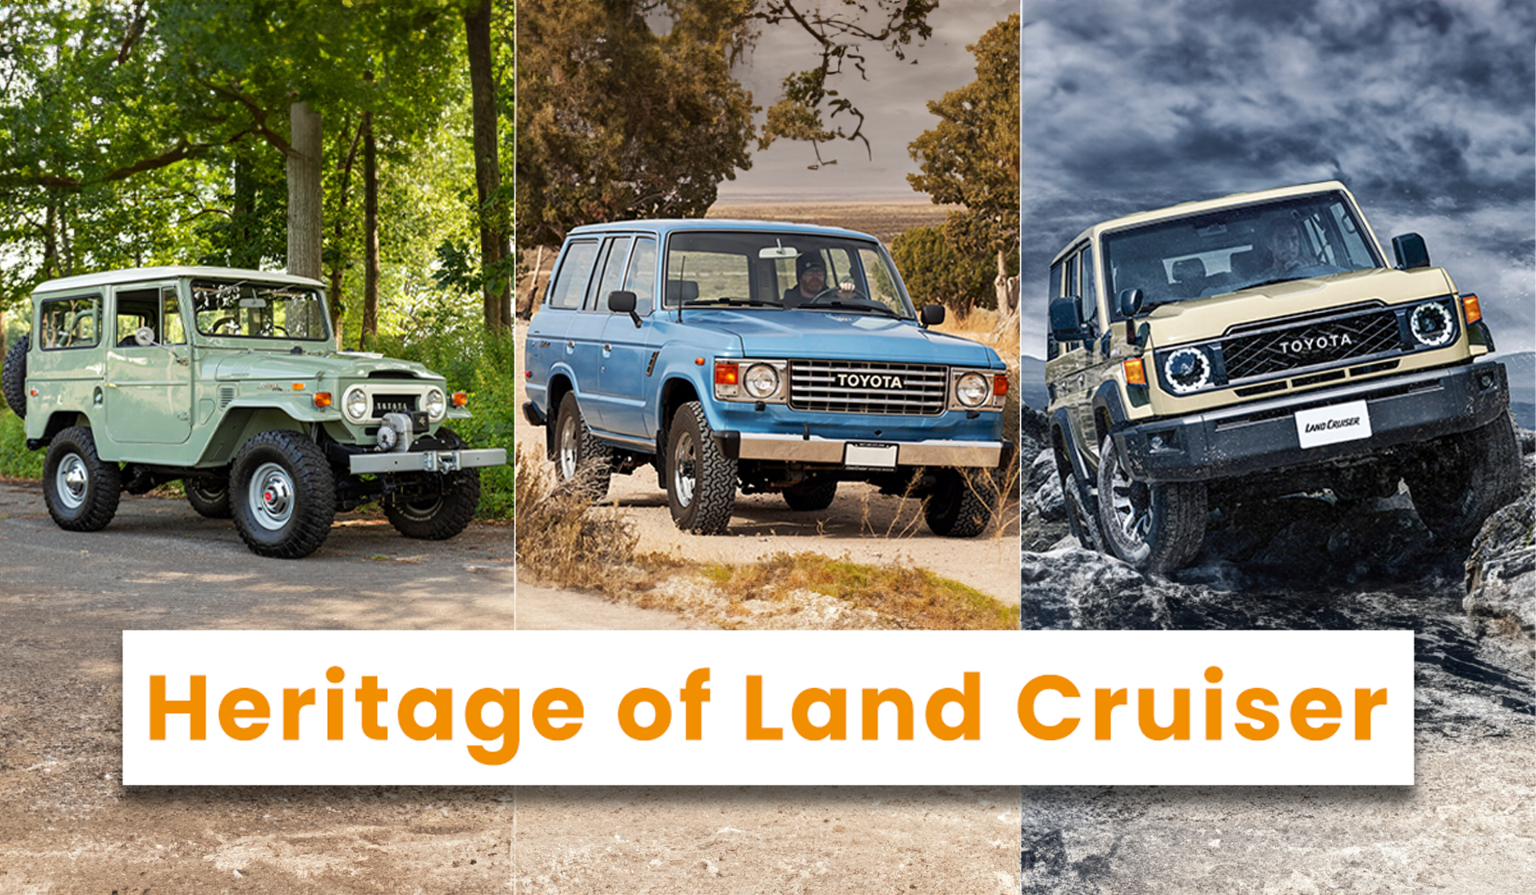 READ ABOUT THE HISTORY OF TOYOTA LAND CRUISER